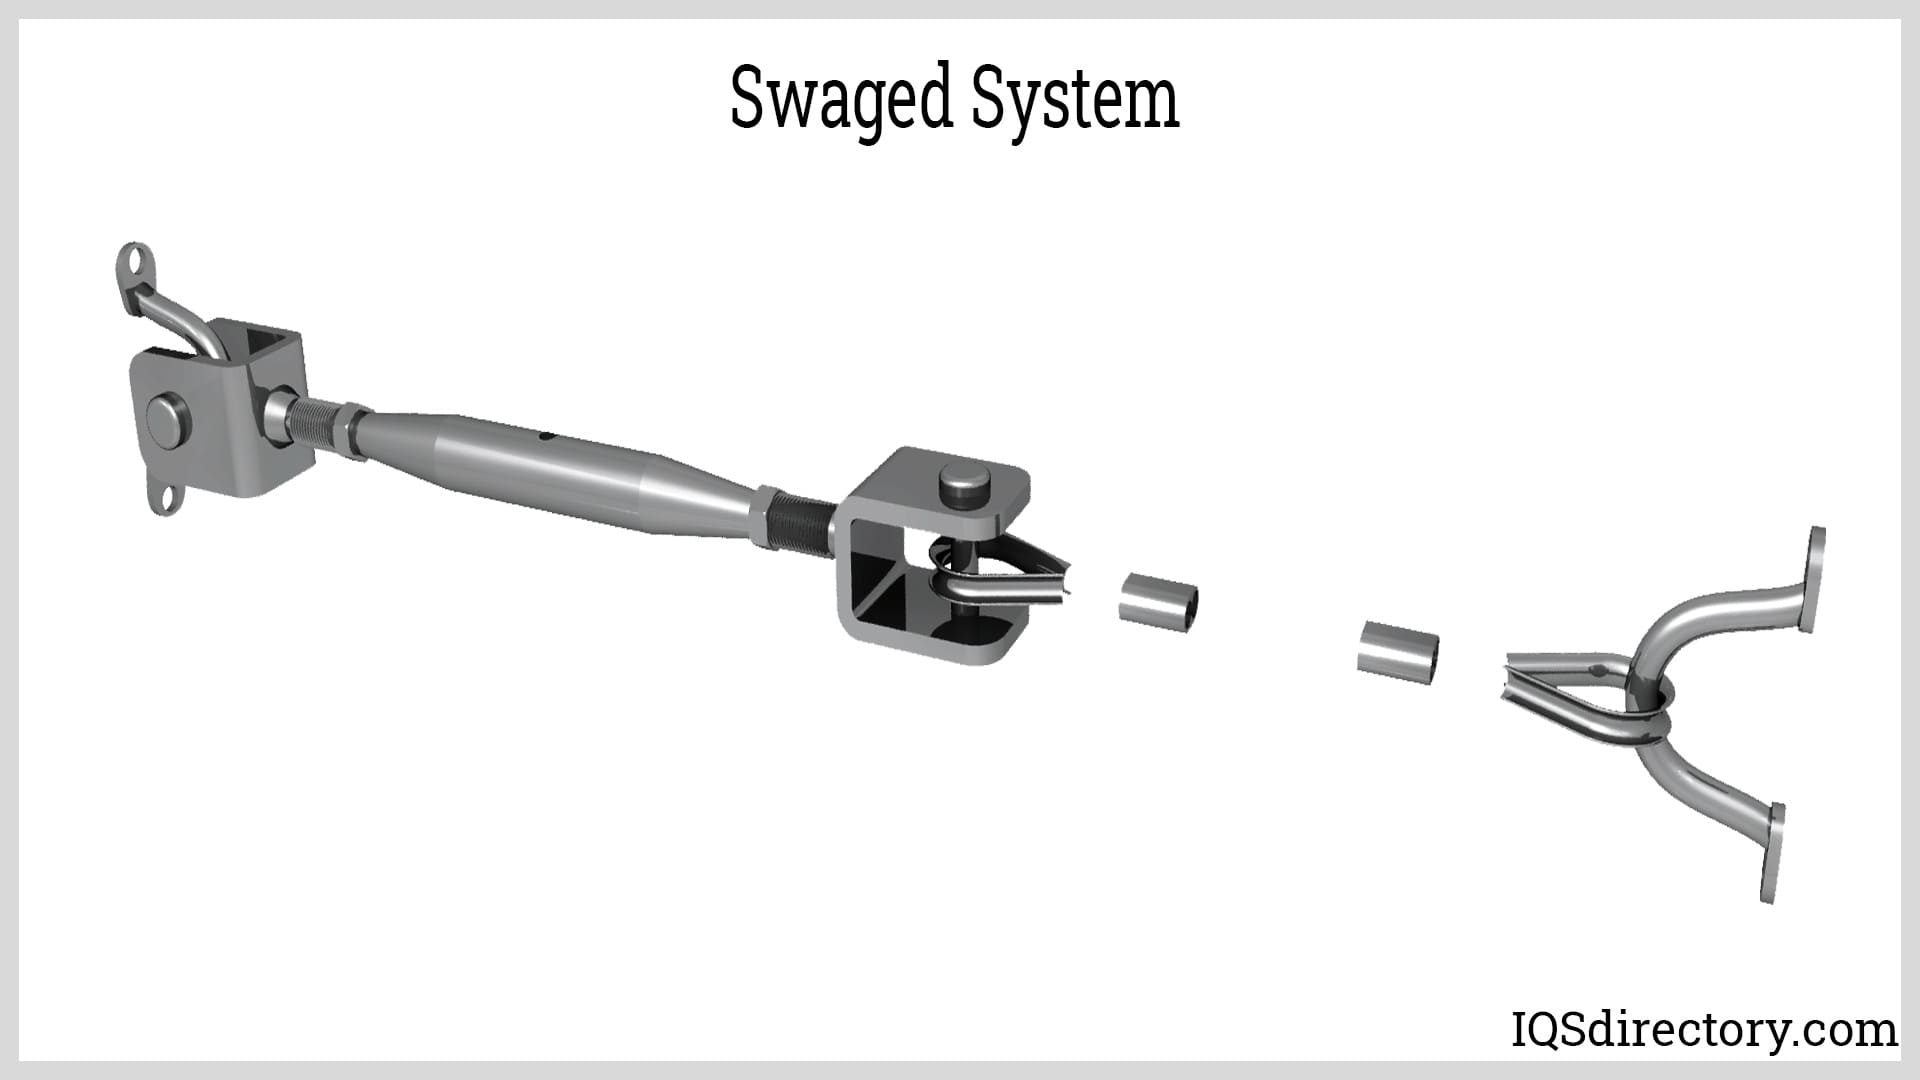 Swaged System